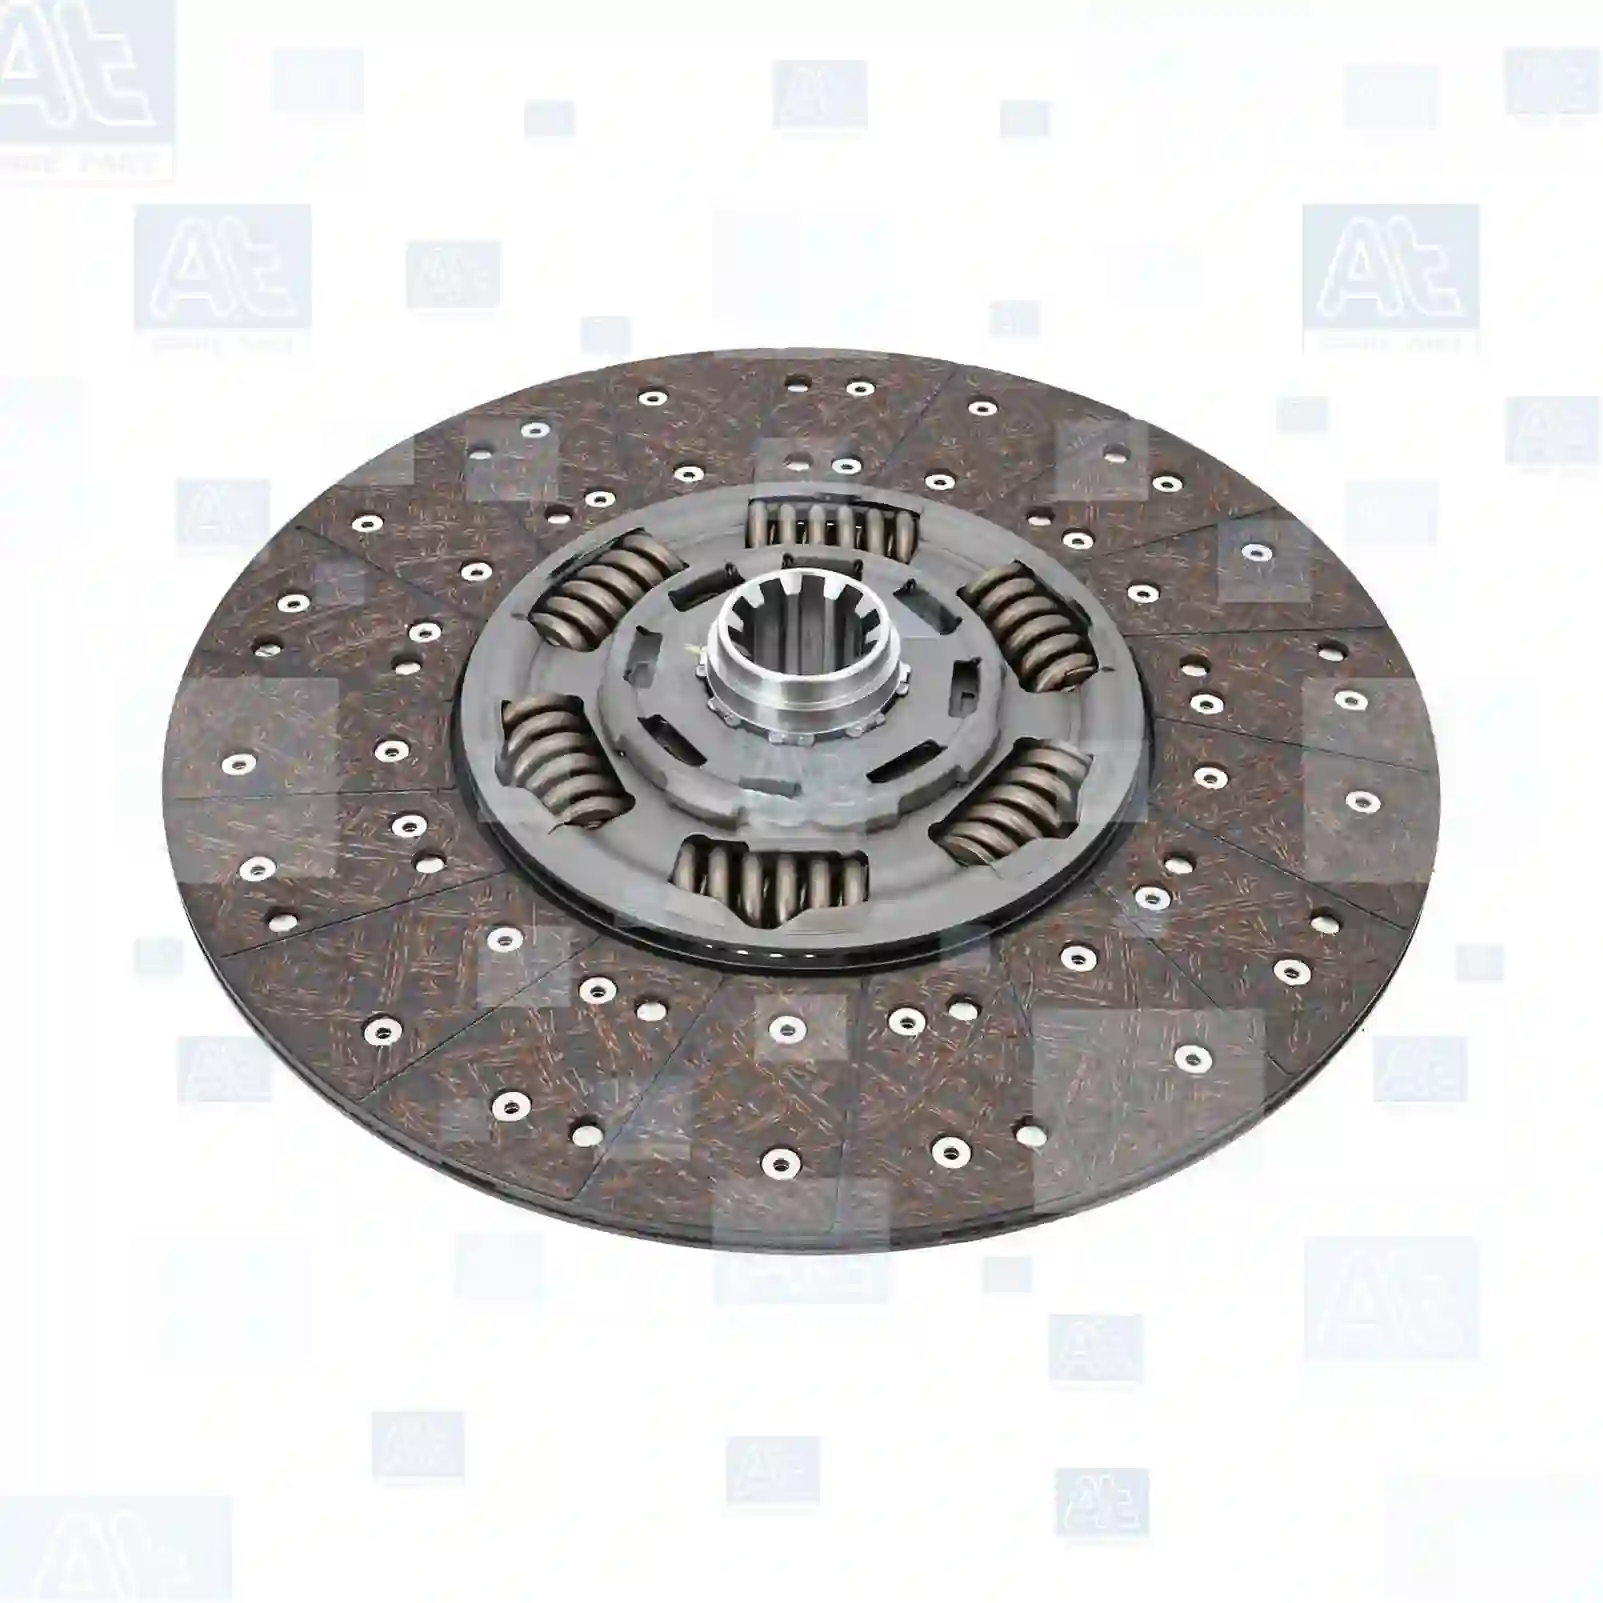 Clutch disc, 77721895, 1663218, 1685707, 1685707A, 1685707R, 1688219, 1846416, 1846416A, 1846416R, 7C467550BA, T165054, 42022207, 504336615, 216300120, 51303010003, 51303010004, 51303010009, 51303010010, 81303010217, 81303010218, 81303010219, 81303010220, 81303010222, 81303010223, 81303010224, 81303010225, 81303010256, 81303010257, 81303010258, 81303010289, 81303010322, 81303010323, 81303010325, 81303010326, 81303010327, 81303010360, 81303010366, 81303010383, 81303010390, 81303010391, 81303010402, 81303010407, 81303010408, 81303010418, 81303010419, 81303010441, 81303010464, 81303010487, 81303010501, 81303010502, 81303010504, 81303010505, 81303010521, 81303010569, 81303010574, 81303010578, 81303010669, 81303016099, 81303019217, 81303019218, 81303019219, 81303019220, 81303019322, 81303019325, 81303019326, 81303019327, 81303019360, 81303019402, 81303019407, 81303019419, 81303019487, 81303019505, 81303019513, 81303019569, 81303019596, 81303019628, 81303019669, 0122509003, 0122509103, 0152509503, 0162504903, 0182508003, 011009997, 011010000, 011060226, 011079830, 042132400, 042134110, 81303010327, 5010244303, 5010244325, 5010245455, 5010452955, 5010545038, 5010545829, 5010613657, 7420076710, 7421076710, TW00718, ZG30294-0008 ||  77721895 At Spare Part | Engine, Accelerator Pedal, Camshaft, Connecting Rod, Crankcase, Crankshaft, Cylinder Head, Engine Suspension Mountings, Exhaust Manifold, Exhaust Gas Recirculation, Filter Kits, Flywheel Housing, General Overhaul Kits, Engine, Intake Manifold, Oil Cleaner, Oil Cooler, Oil Filter, Oil Pump, Oil Sump, Piston & Liner, Sensor & Switch, Timing Case, Turbocharger, Cooling System, Belt Tensioner, Coolant Filter, Coolant Pipe, Corrosion Prevention Agent, Drive, Expansion Tank, Fan, Intercooler, Monitors & Gauges, Radiator, Thermostat, V-Belt / Timing belt, Water Pump, Fuel System, Electronical Injector Unit, Feed Pump, Fuel Filter, cpl., Fuel Gauge Sender,  Fuel Line, Fuel Pump, Fuel Tank, Injection Line Kit, Injection Pump, Exhaust System, Clutch & Pedal, Gearbox, Propeller Shaft, Axles, Brake System, Hubs & Wheels, Suspension, Leaf Spring, Universal Parts / Accessories, Steering, Electrical System, Cabin Clutch disc, 77721895, 1663218, 1685707, 1685707A, 1685707R, 1688219, 1846416, 1846416A, 1846416R, 7C467550BA, T165054, 42022207, 504336615, 216300120, 51303010003, 51303010004, 51303010009, 51303010010, 81303010217, 81303010218, 81303010219, 81303010220, 81303010222, 81303010223, 81303010224, 81303010225, 81303010256, 81303010257, 81303010258, 81303010289, 81303010322, 81303010323, 81303010325, 81303010326, 81303010327, 81303010360, 81303010366, 81303010383, 81303010390, 81303010391, 81303010402, 81303010407, 81303010408, 81303010418, 81303010419, 81303010441, 81303010464, 81303010487, 81303010501, 81303010502, 81303010504, 81303010505, 81303010521, 81303010569, 81303010574, 81303010578, 81303010669, 81303016099, 81303019217, 81303019218, 81303019219, 81303019220, 81303019322, 81303019325, 81303019326, 81303019327, 81303019360, 81303019402, 81303019407, 81303019419, 81303019487, 81303019505, 81303019513, 81303019569, 81303019596, 81303019628, 81303019669, 0122509003, 0122509103, 0152509503, 0162504903, 0182508003, 011009997, 011010000, 011060226, 011079830, 042132400, 042134110, 81303010327, 5010244303, 5010244325, 5010245455, 5010452955, 5010545038, 5010545829, 5010613657, 7420076710, 7421076710, TW00718, ZG30294-0008 ||  77721895 At Spare Part | Engine, Accelerator Pedal, Camshaft, Connecting Rod, Crankcase, Crankshaft, Cylinder Head, Engine Suspension Mountings, Exhaust Manifold, Exhaust Gas Recirculation, Filter Kits, Flywheel Housing, General Overhaul Kits, Engine, Intake Manifold, Oil Cleaner, Oil Cooler, Oil Filter, Oil Pump, Oil Sump, Piston & Liner, Sensor & Switch, Timing Case, Turbocharger, Cooling System, Belt Tensioner, Coolant Filter, Coolant Pipe, Corrosion Prevention Agent, Drive, Expansion Tank, Fan, Intercooler, Monitors & Gauges, Radiator, Thermostat, V-Belt / Timing belt, Water Pump, Fuel System, Electronical Injector Unit, Feed Pump, Fuel Filter, cpl., Fuel Gauge Sender,  Fuel Line, Fuel Pump, Fuel Tank, Injection Line Kit, Injection Pump, Exhaust System, Clutch & Pedal, Gearbox, Propeller Shaft, Axles, Brake System, Hubs & Wheels, Suspension, Leaf Spring, Universal Parts / Accessories, Steering, Electrical System, Cabin